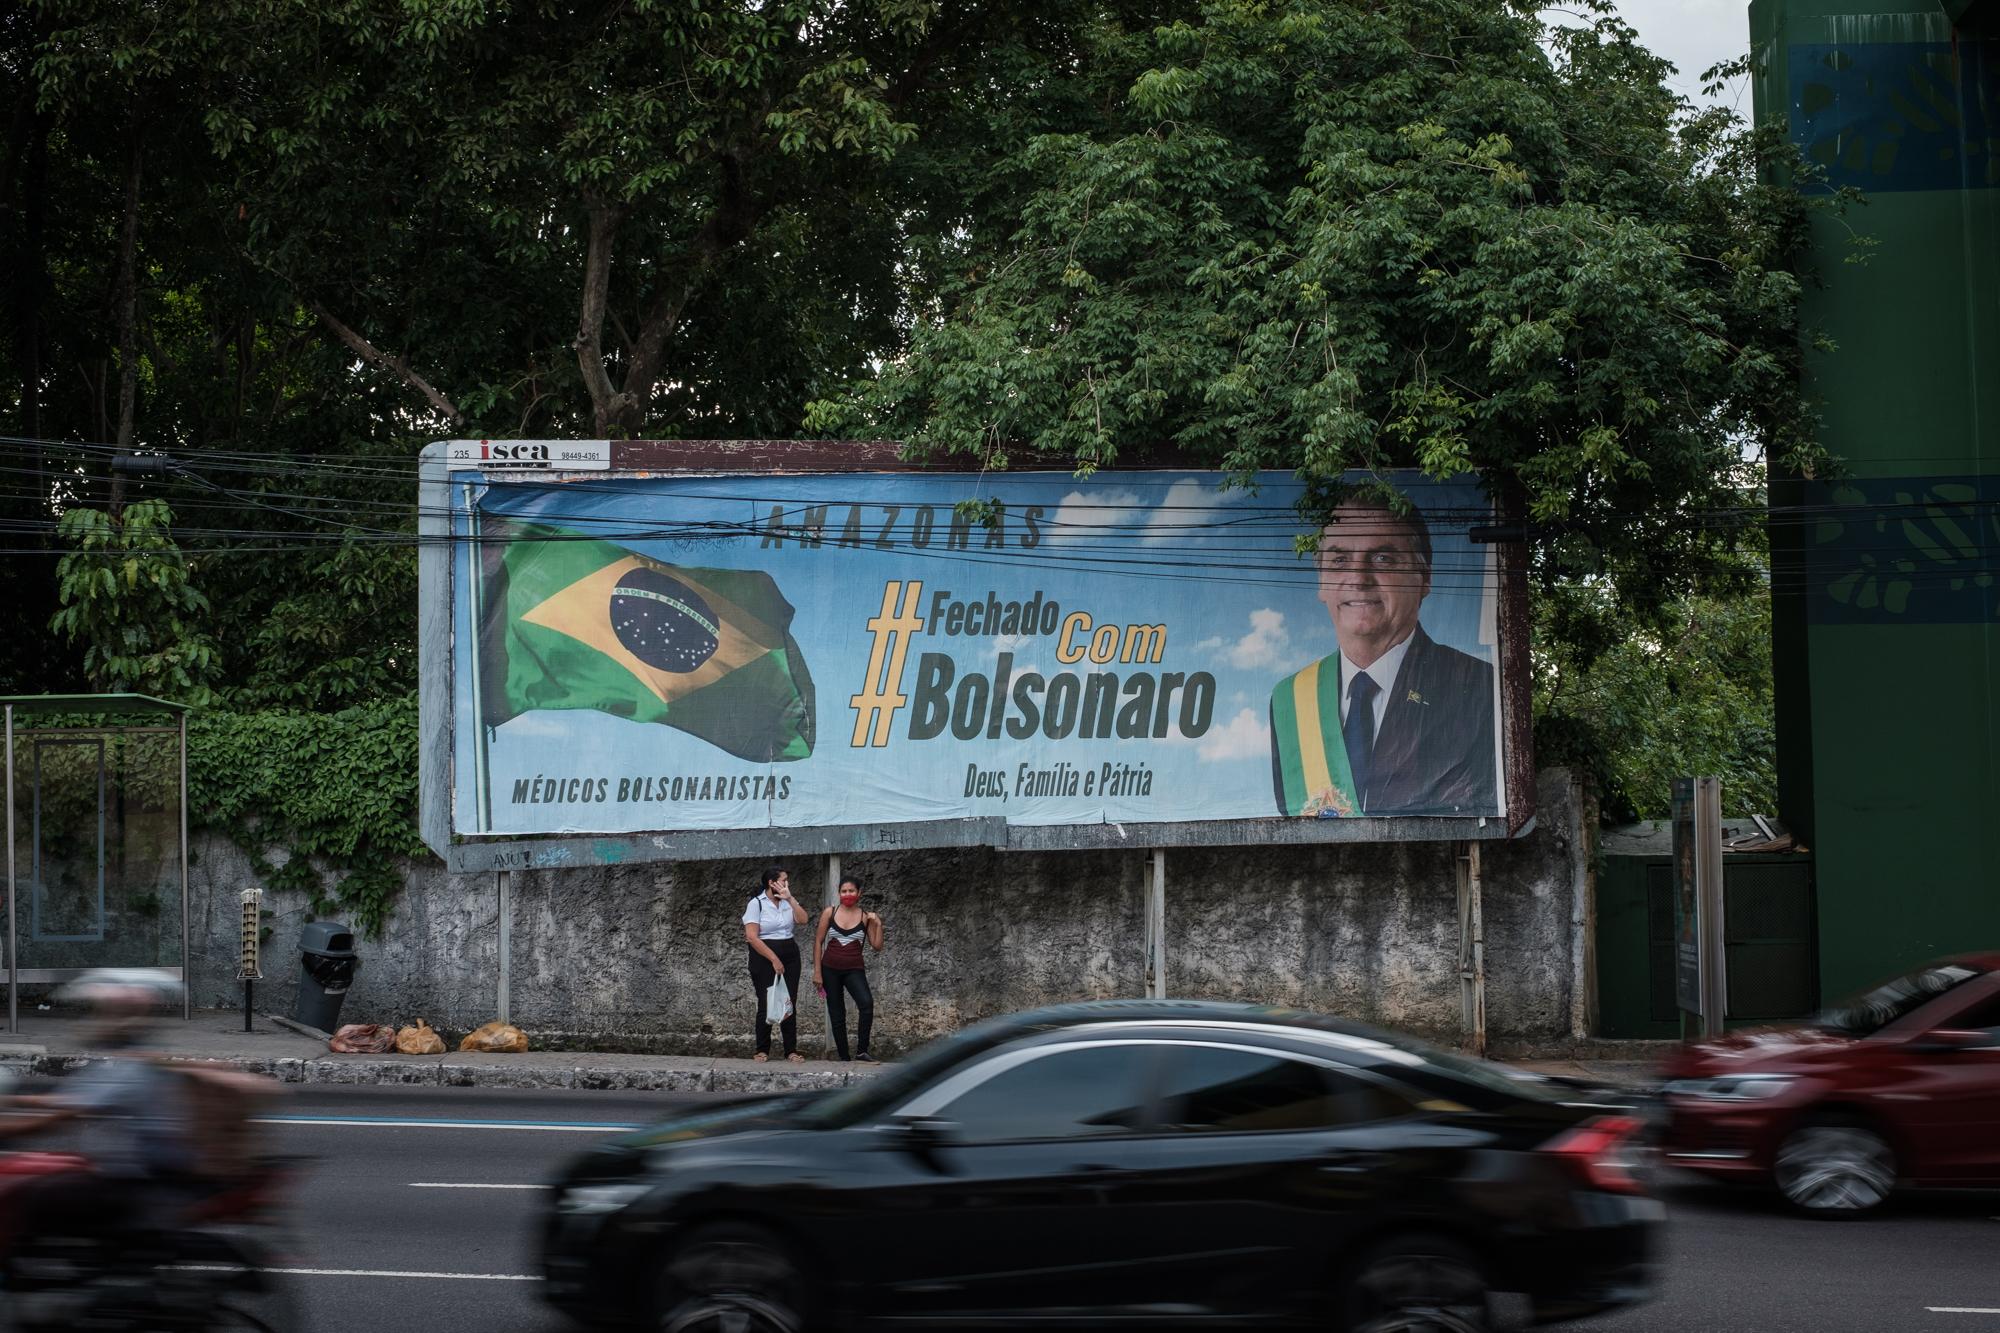 We Were Always Here - A billboard in central Manaus claiming that Amazonas...